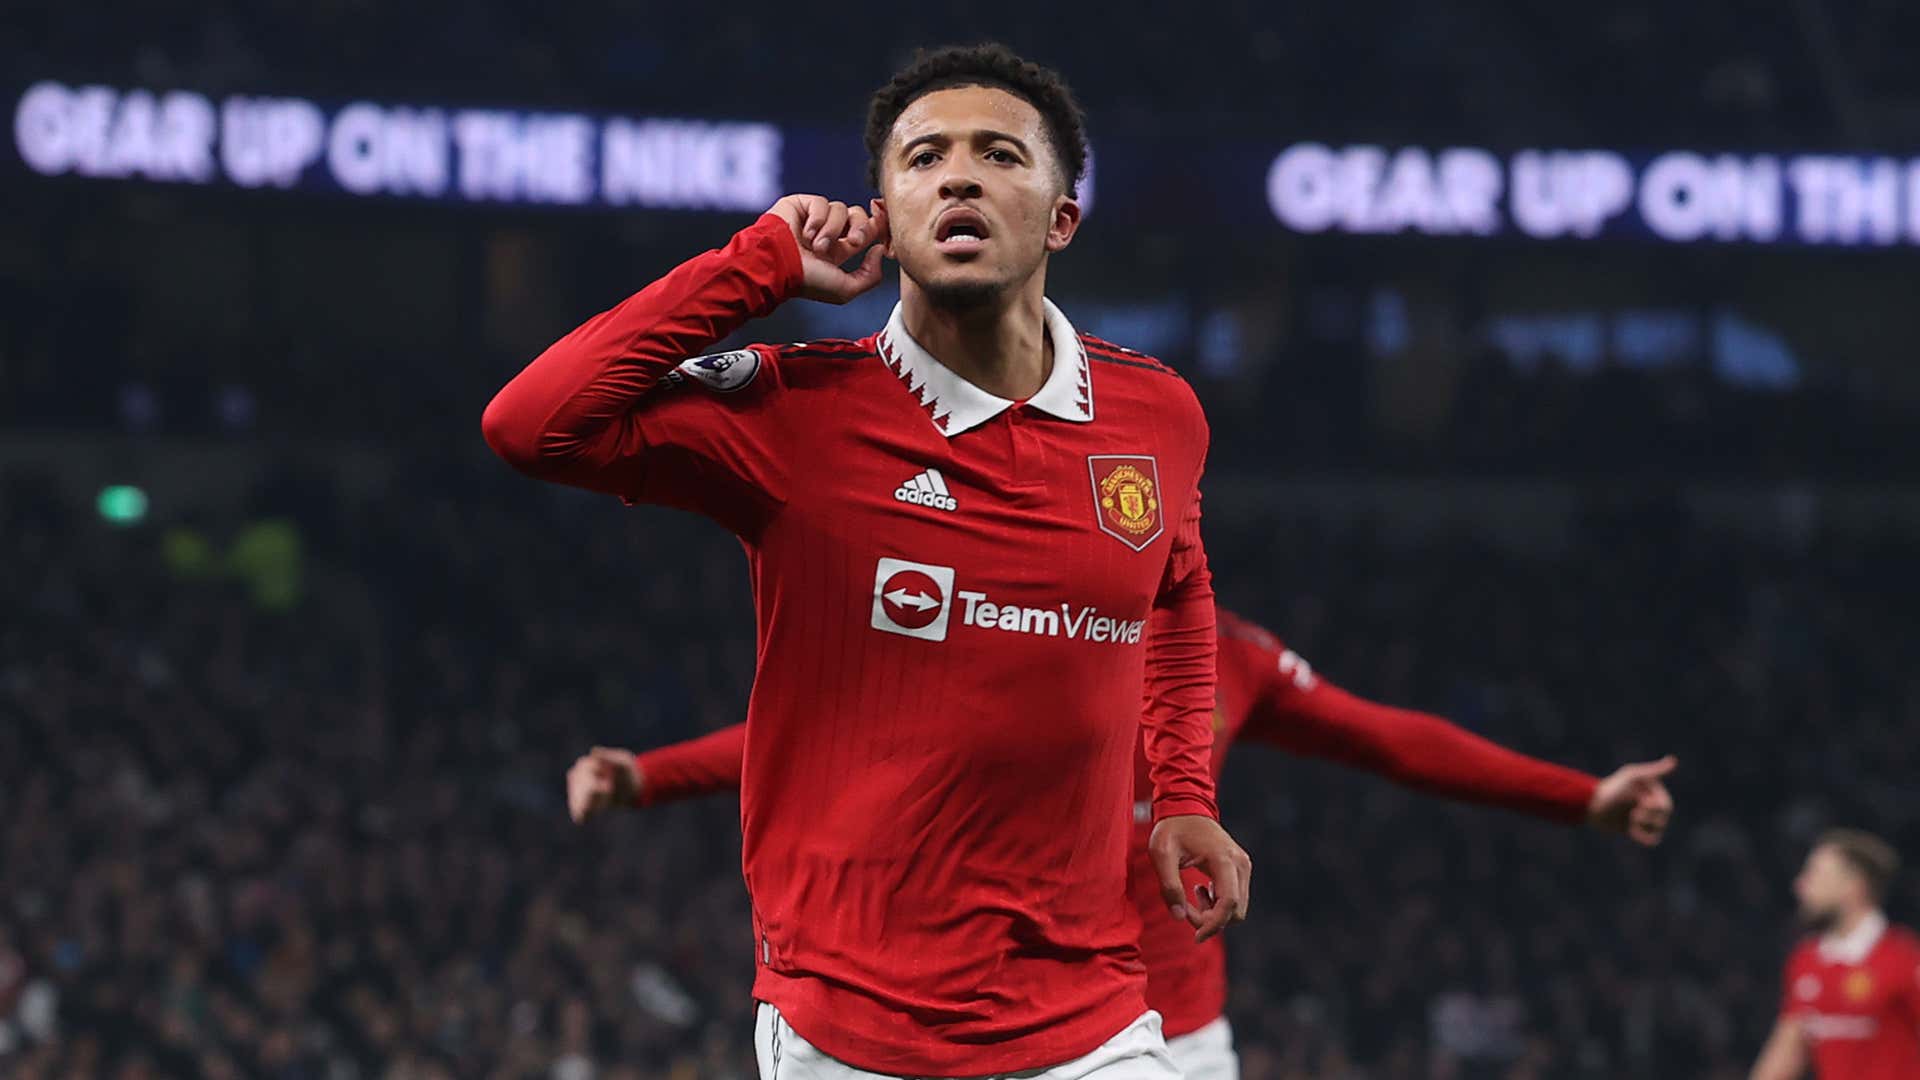 Jadon Sancho's rollercoaster at Man Utd: Snubbed No.7, Ronaldo's shadow, and the intriguing standoff with Erik ten Hag.